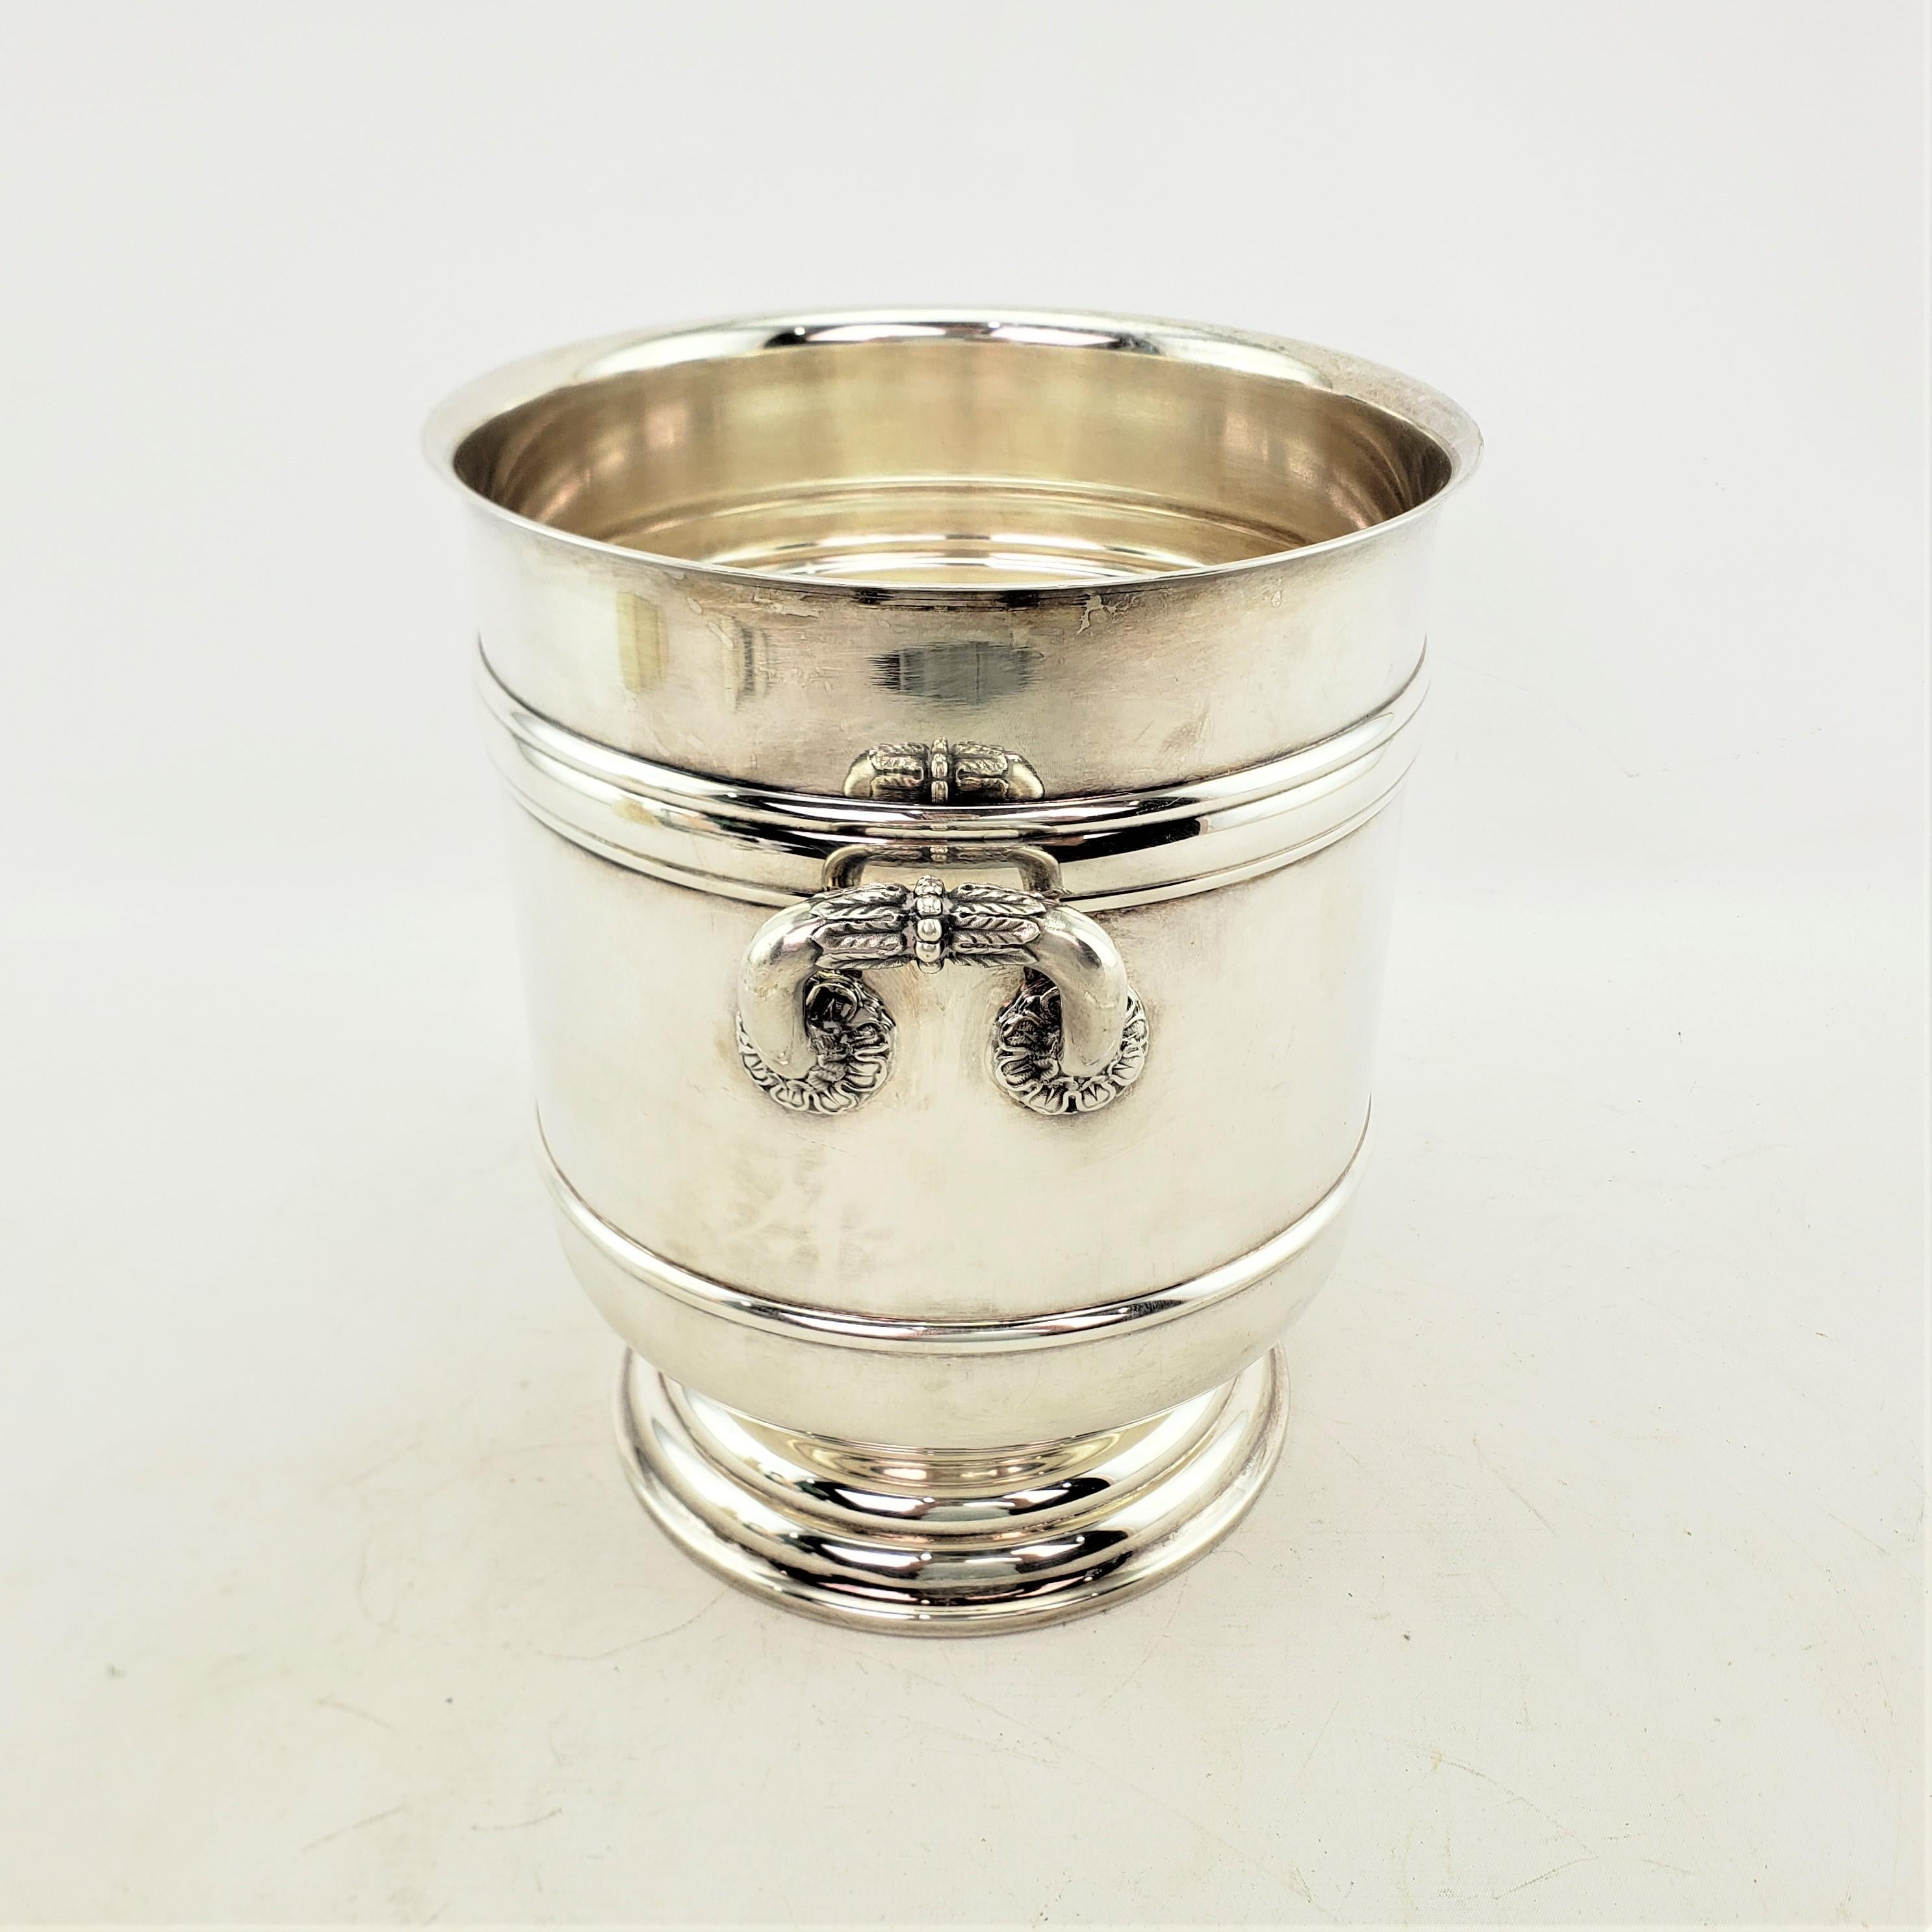 French Mid-Century Era Christofle Silver Plated Ice Bucket or Bottle Chiller For Sale